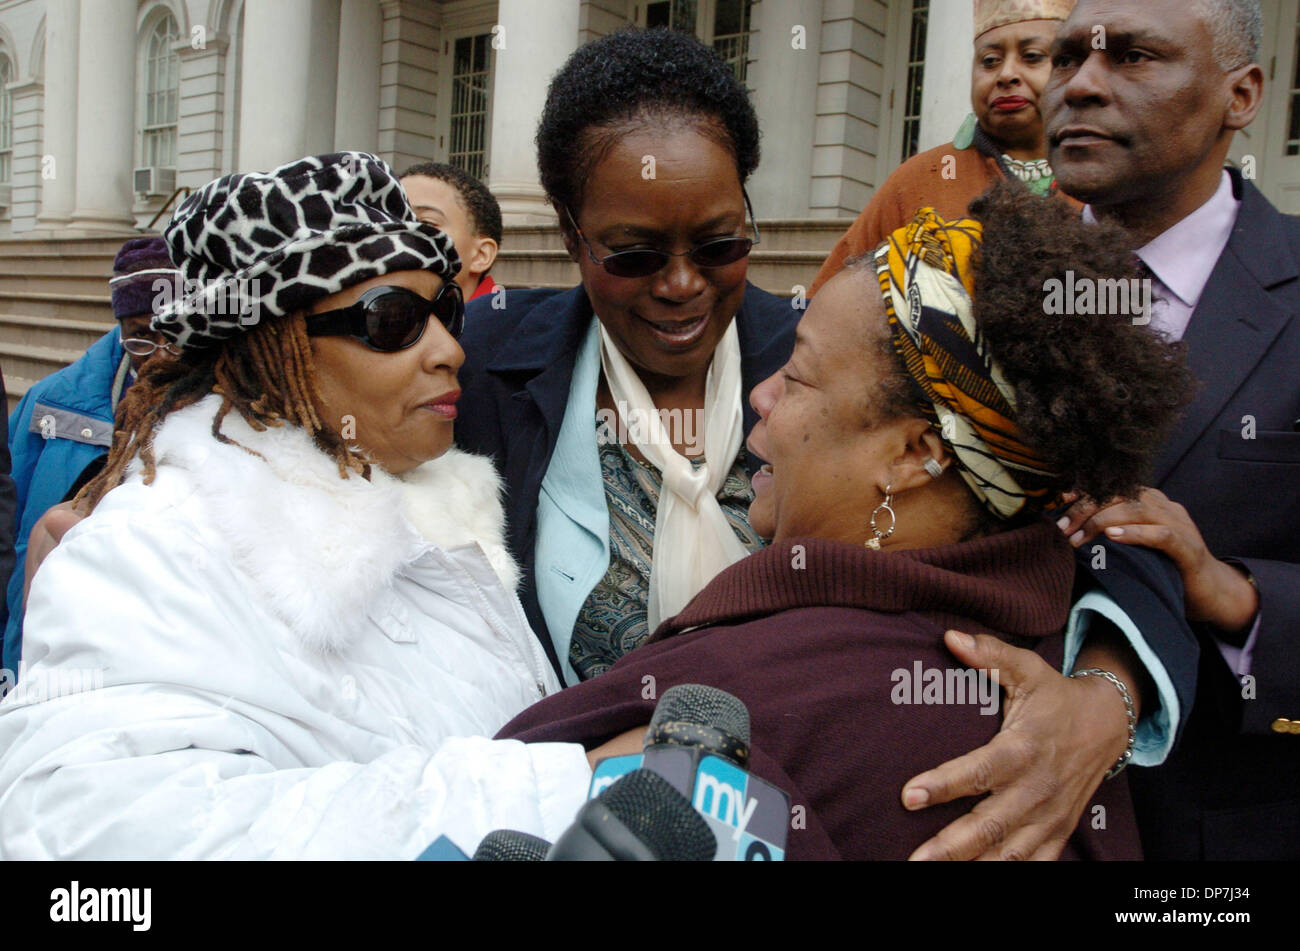 Nov 18, 2006; MANHATTAN, NEW YORK, USA; Jackie Rowe-Adams, (L) of Harlem whose sons Anthony Bouldin, 17 at the time and killed at 122nd and 7th Avenue and Tyrone Bouldin, 28 at the time and killed in Maryland, Jean Corbett Parker (2nd from L), of Harlem whose son Latran Parker was 26 when he was shot and killed in 2001 at the corner of 131st Street and 7th Avenue, Jean Royster-Hill Stock Photo